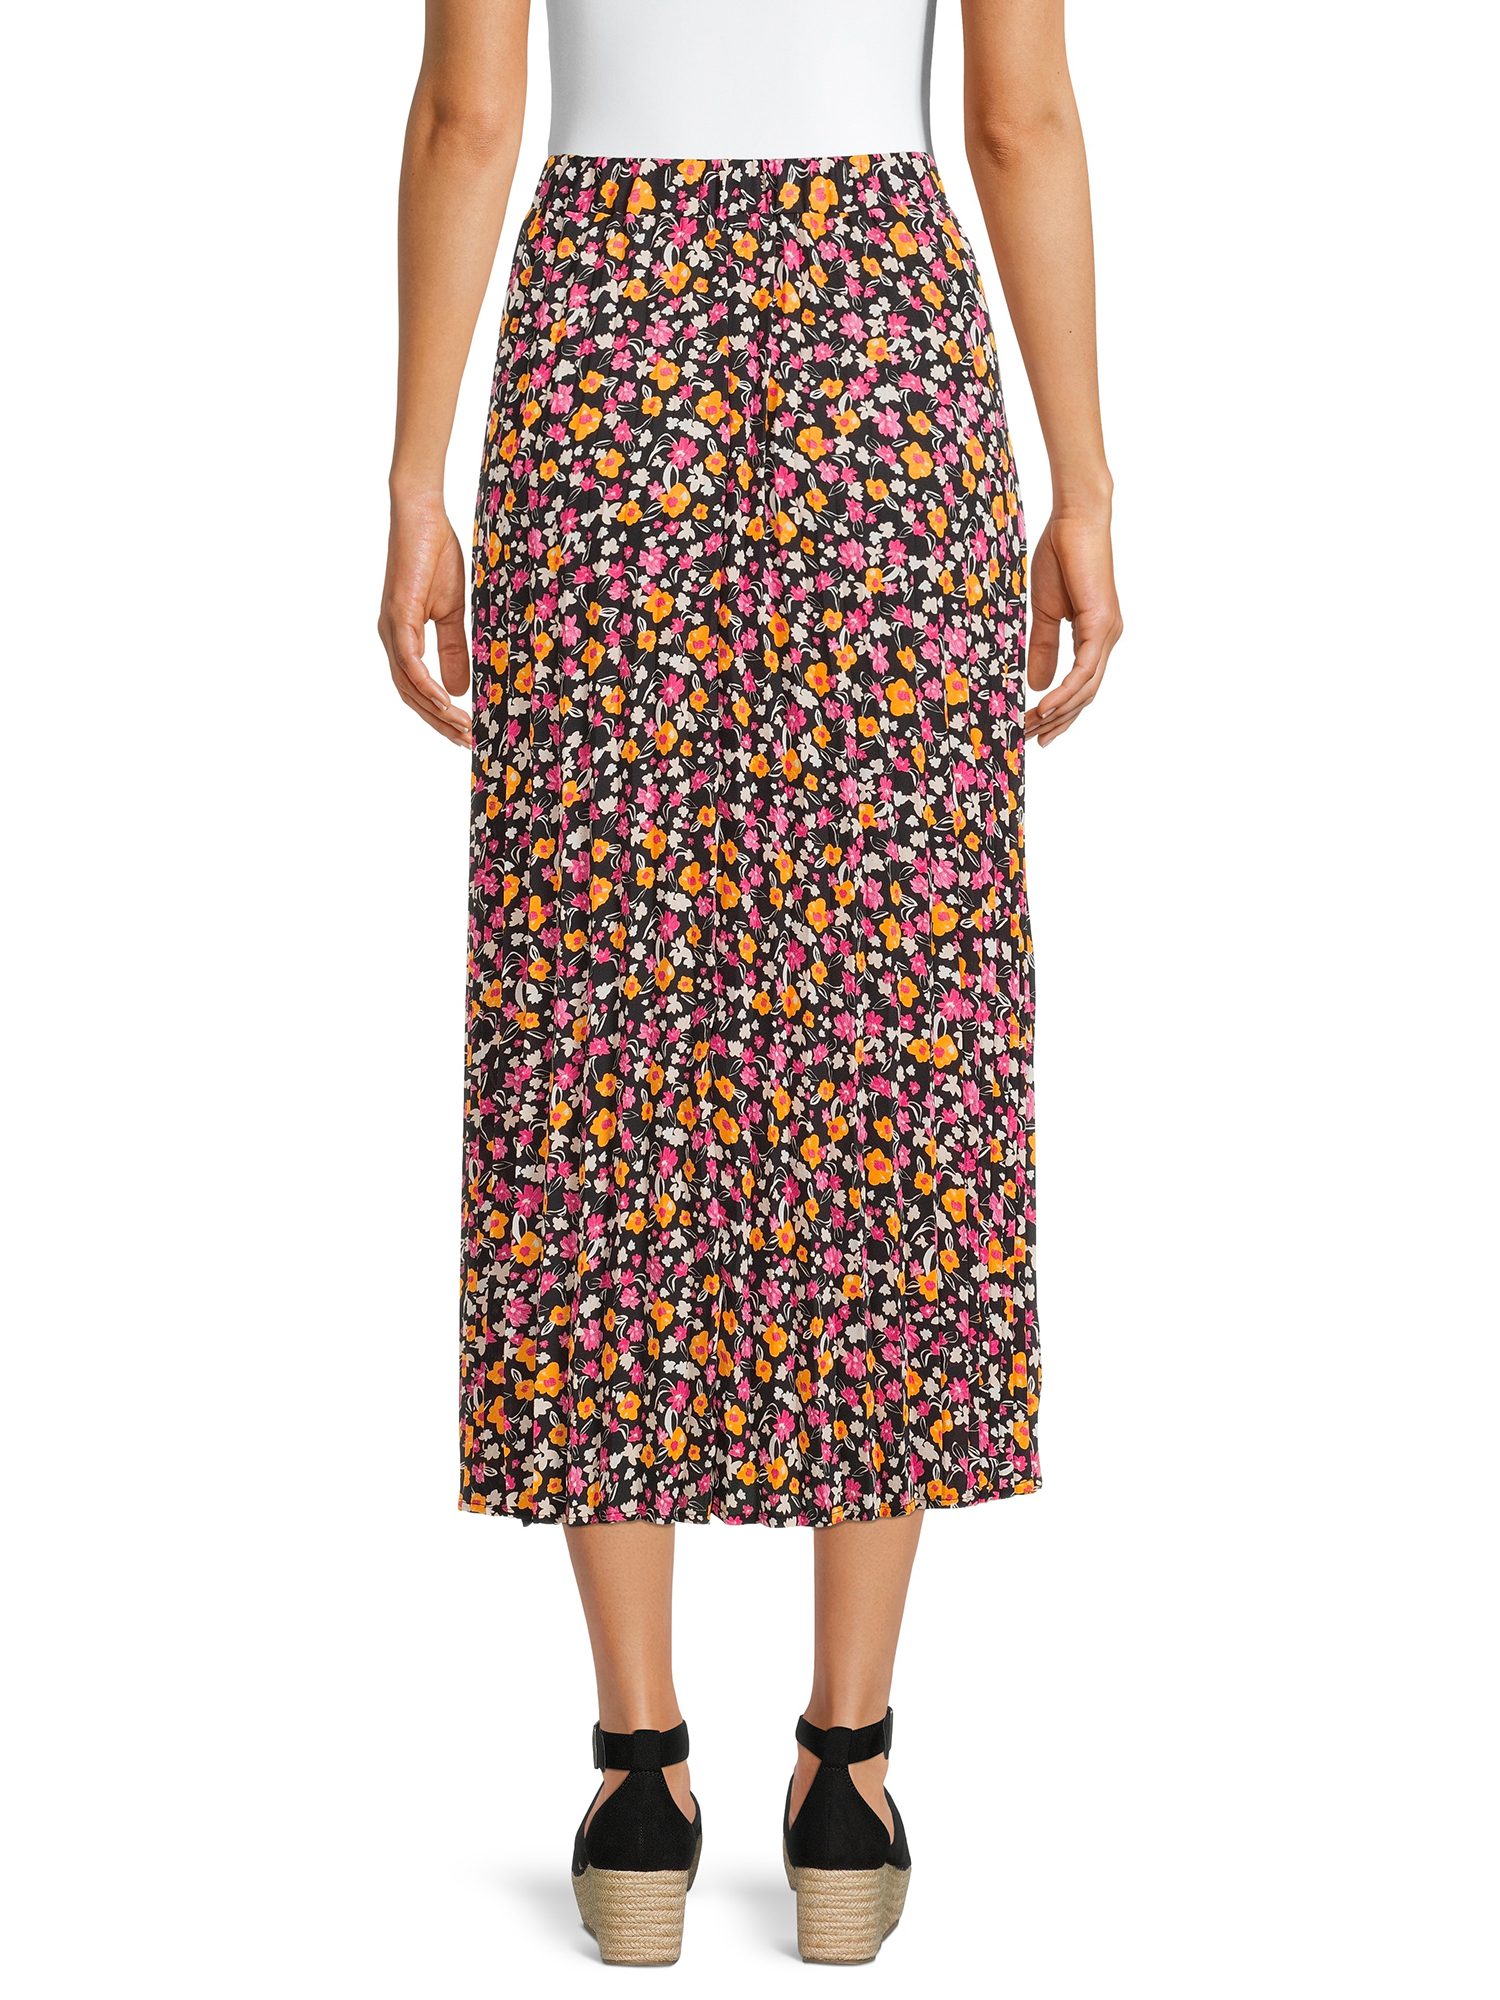 The Get Women's Pleated Maxi Skirt - image 3 of 5